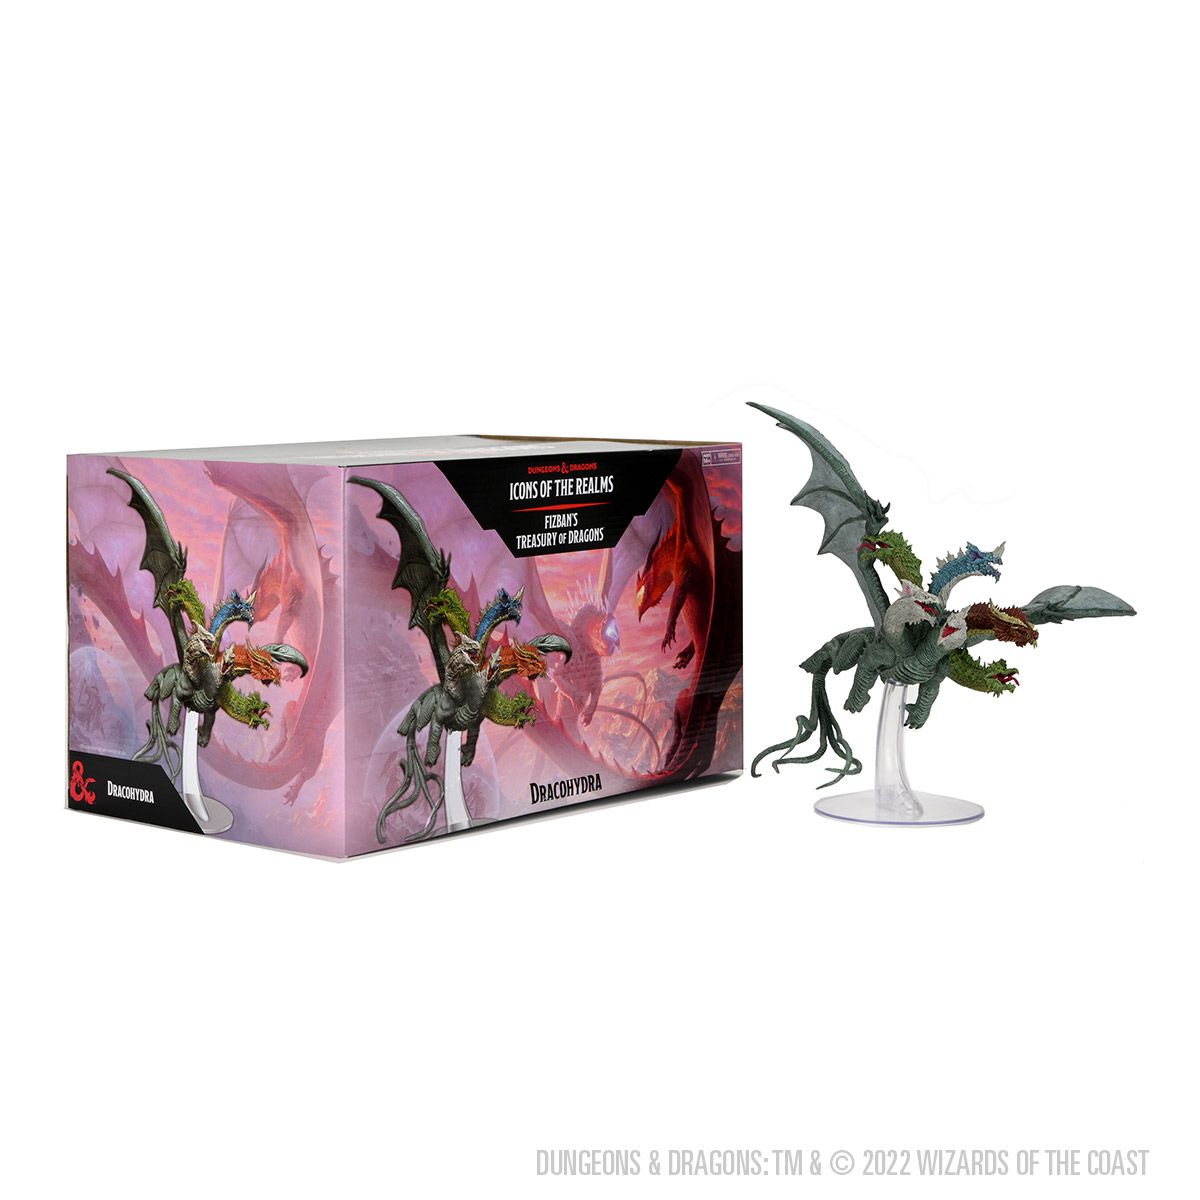 Dungeons & Dragons Icons of the Realms Miniatures: Fizban's Treasury of Dragons - Dracohydra Premium